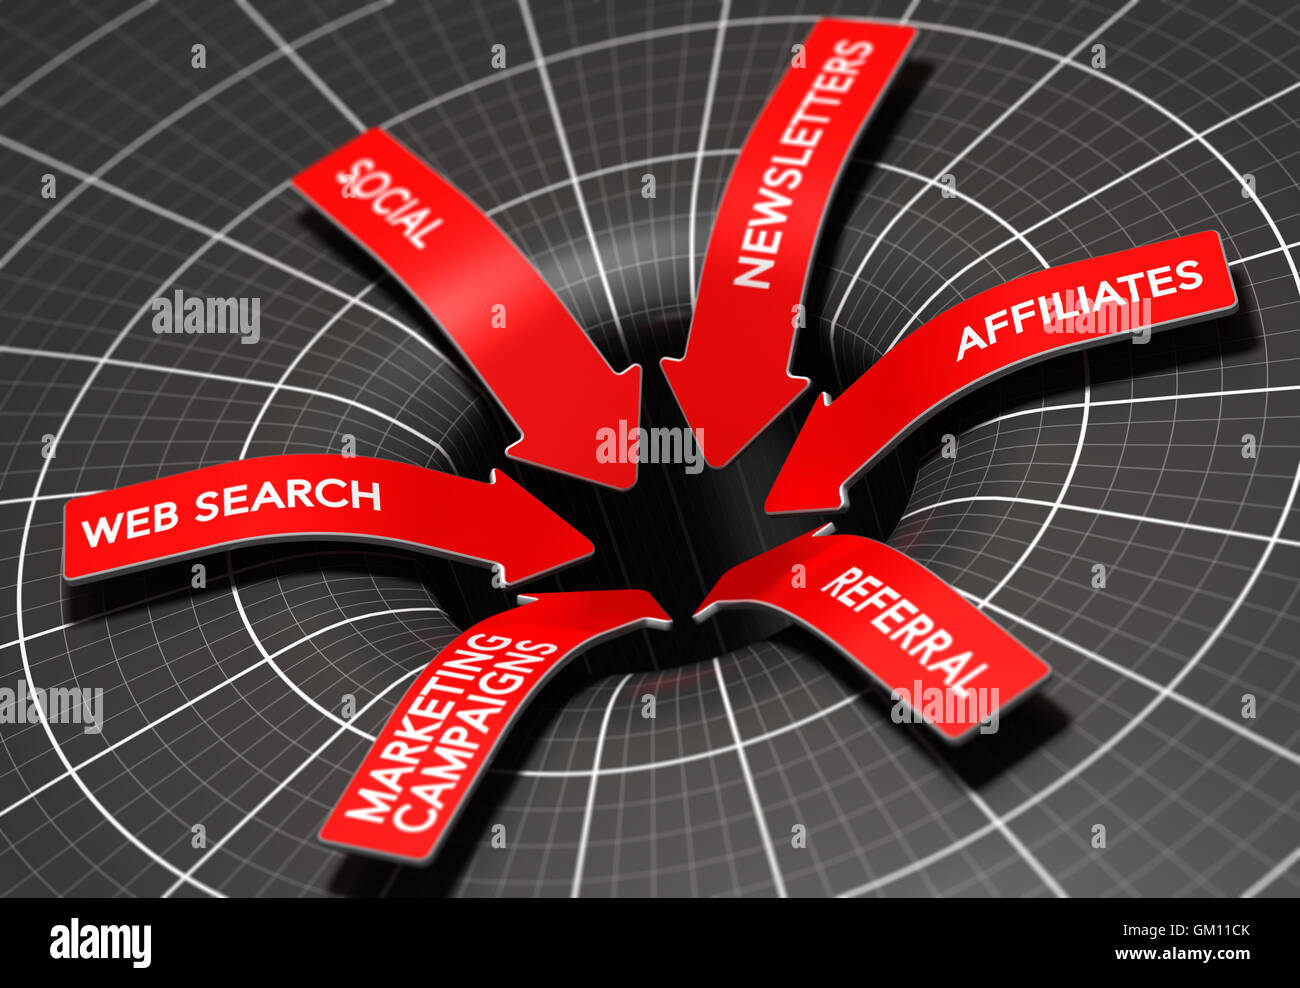 3D illustration of a conversion funnel with multi channel entry. The image contain six arrow with text over black background and Stock Photo